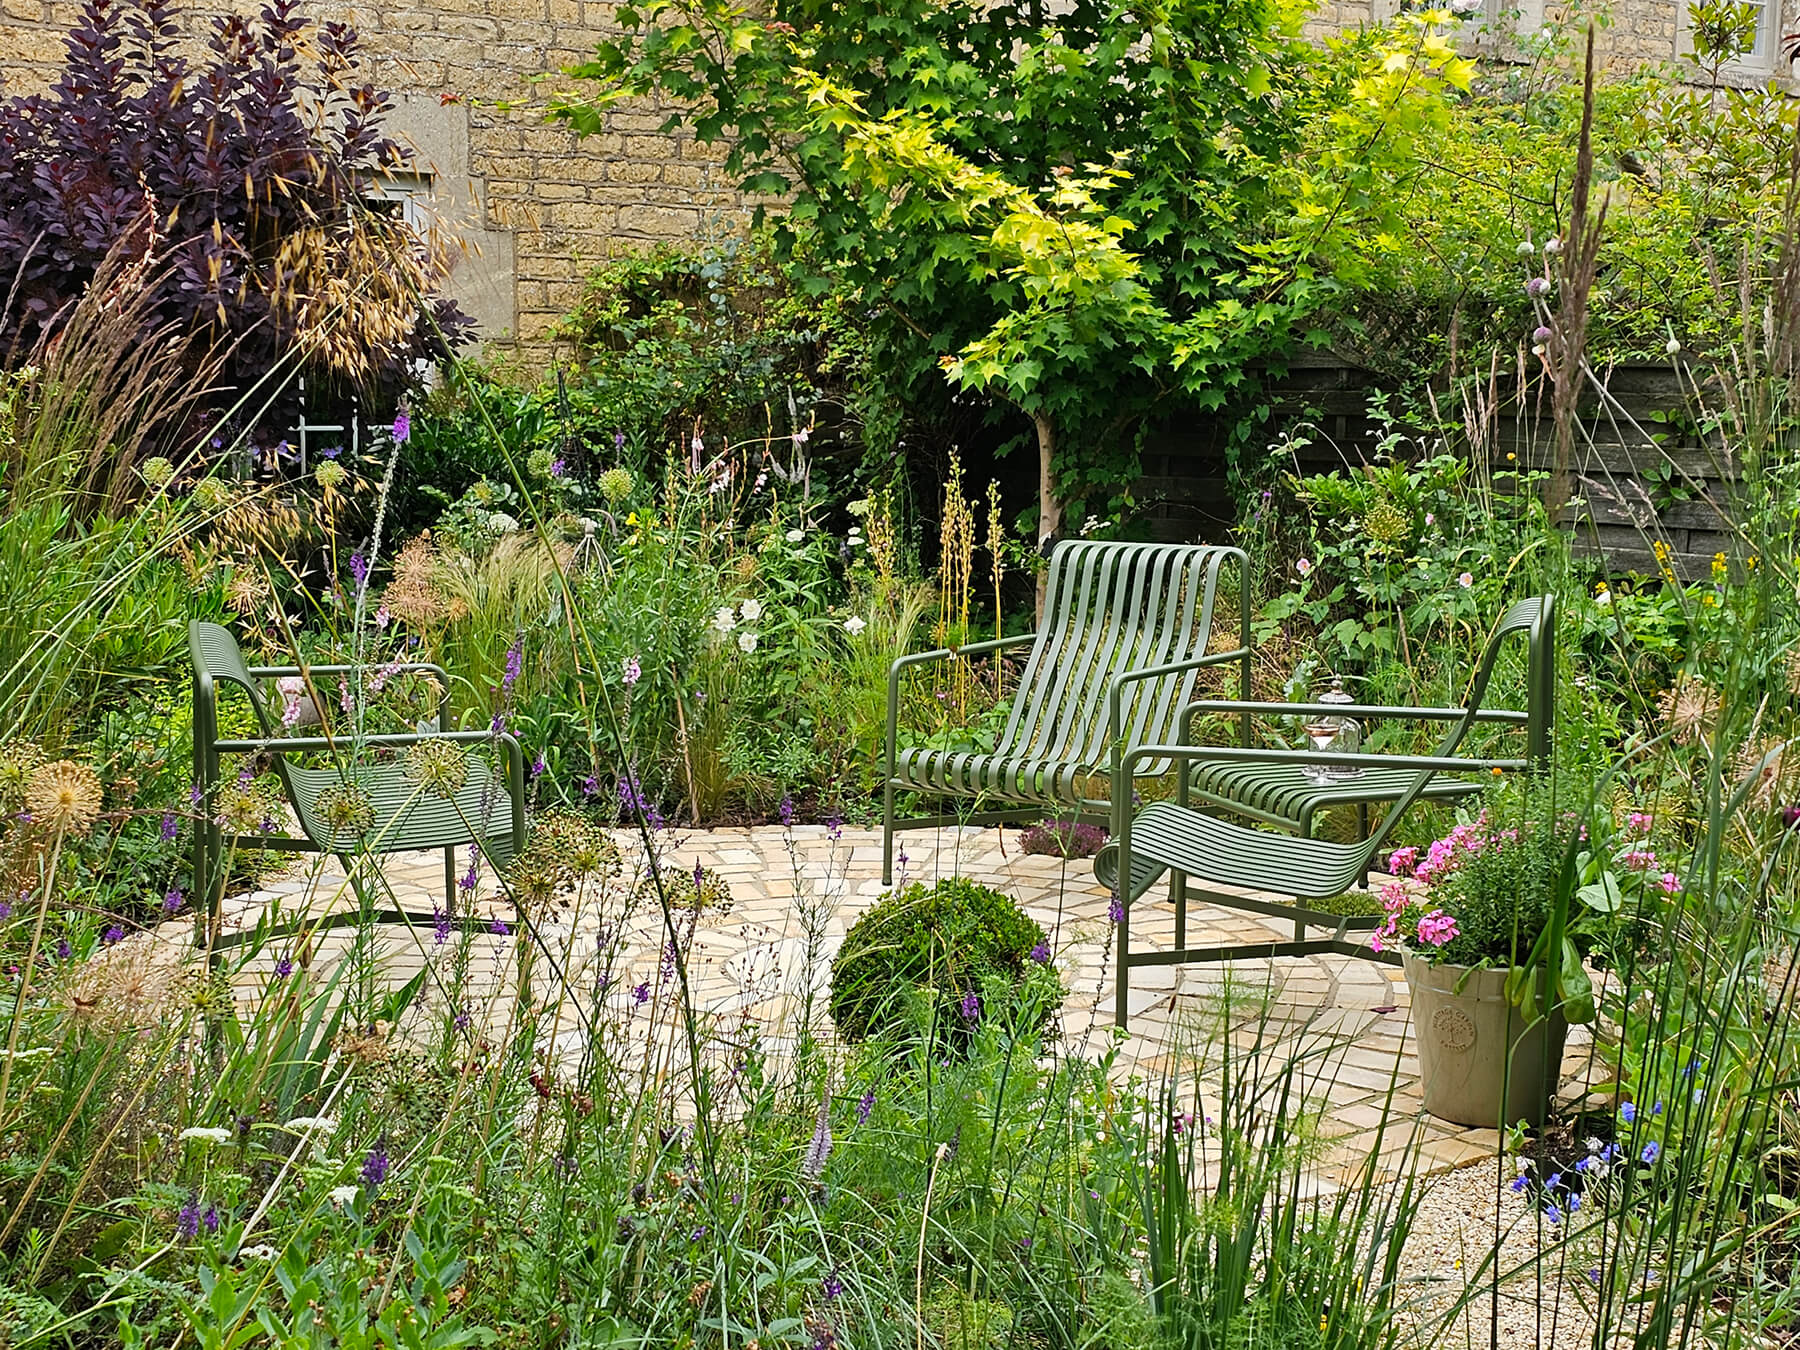 The No Lawn Front Garden, a Cotswolds cottage garden with circular sandstone seating area surrounded by naturalistic planting. Designed by April House – Award Winning Cotswolds Garden Design